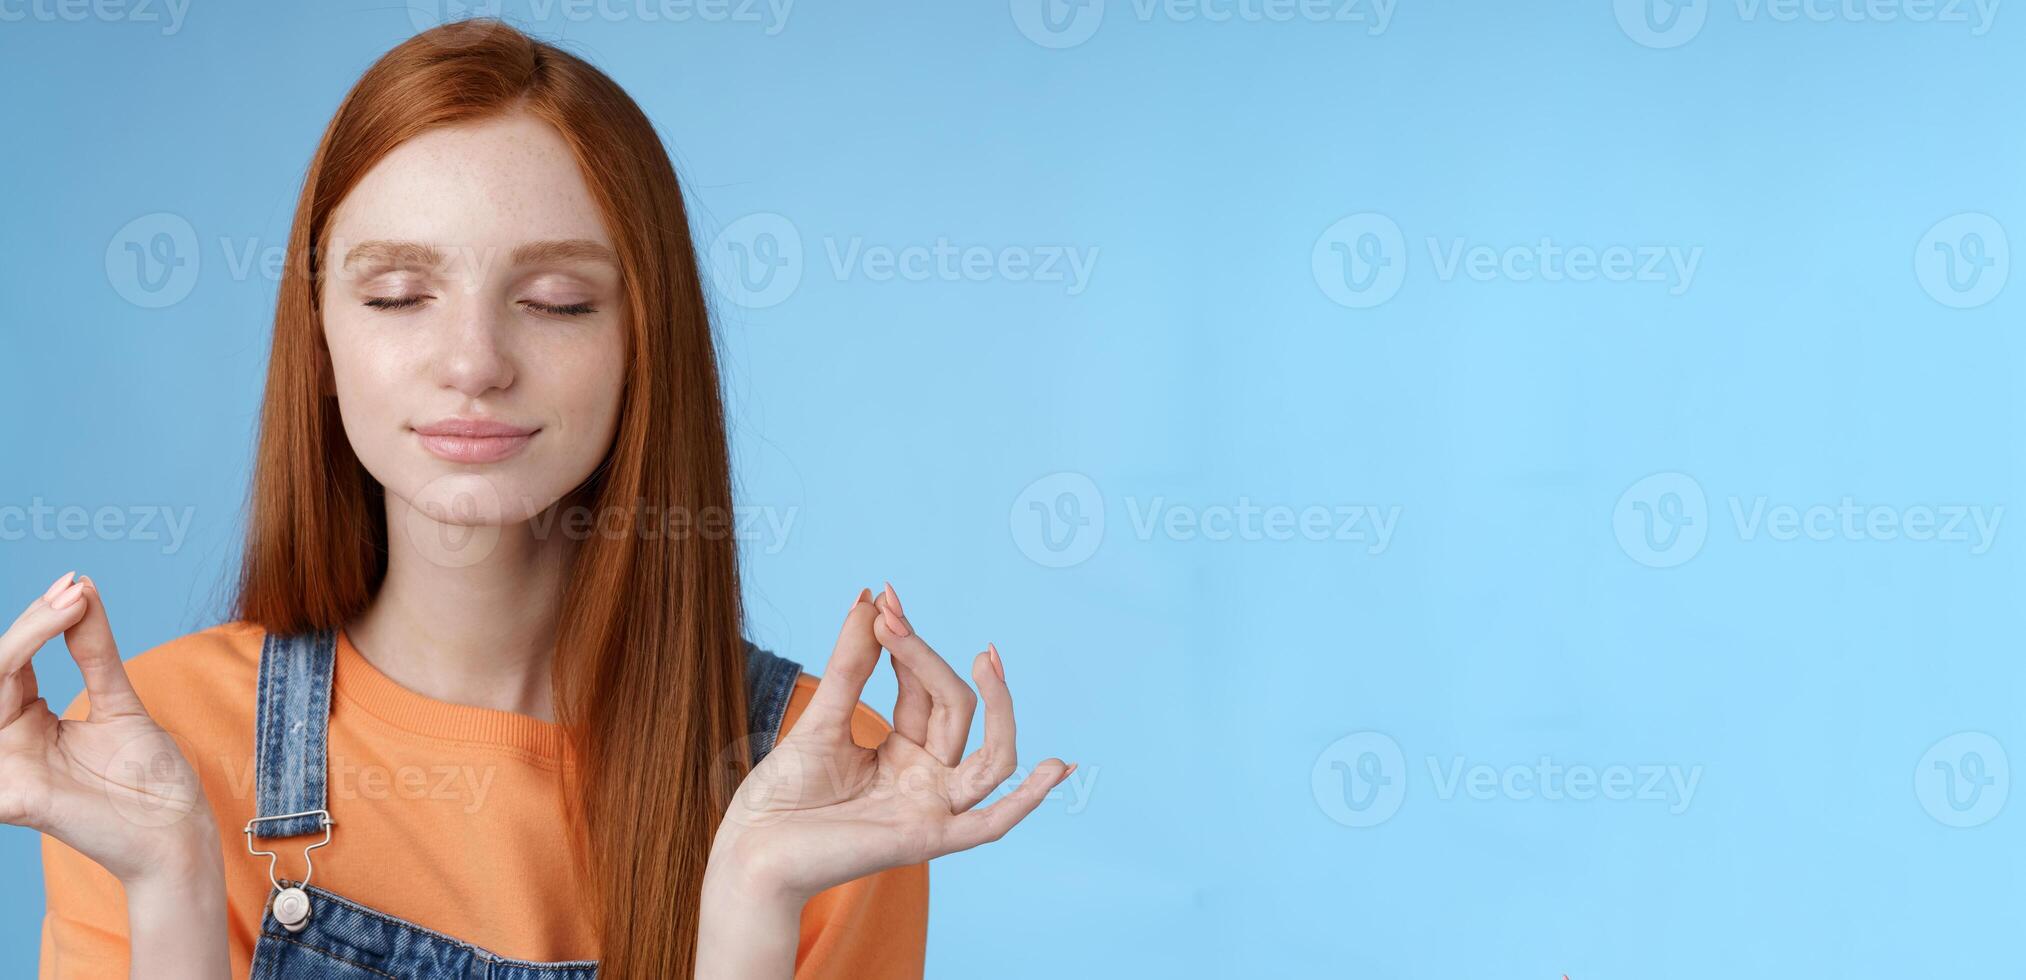 Keep calm redhead relaxed girl stay relieved positive close eyes smiling delighted raising hands sideways lotus mudra gesture practice yoga meditation do breathing exercise, blue background photo